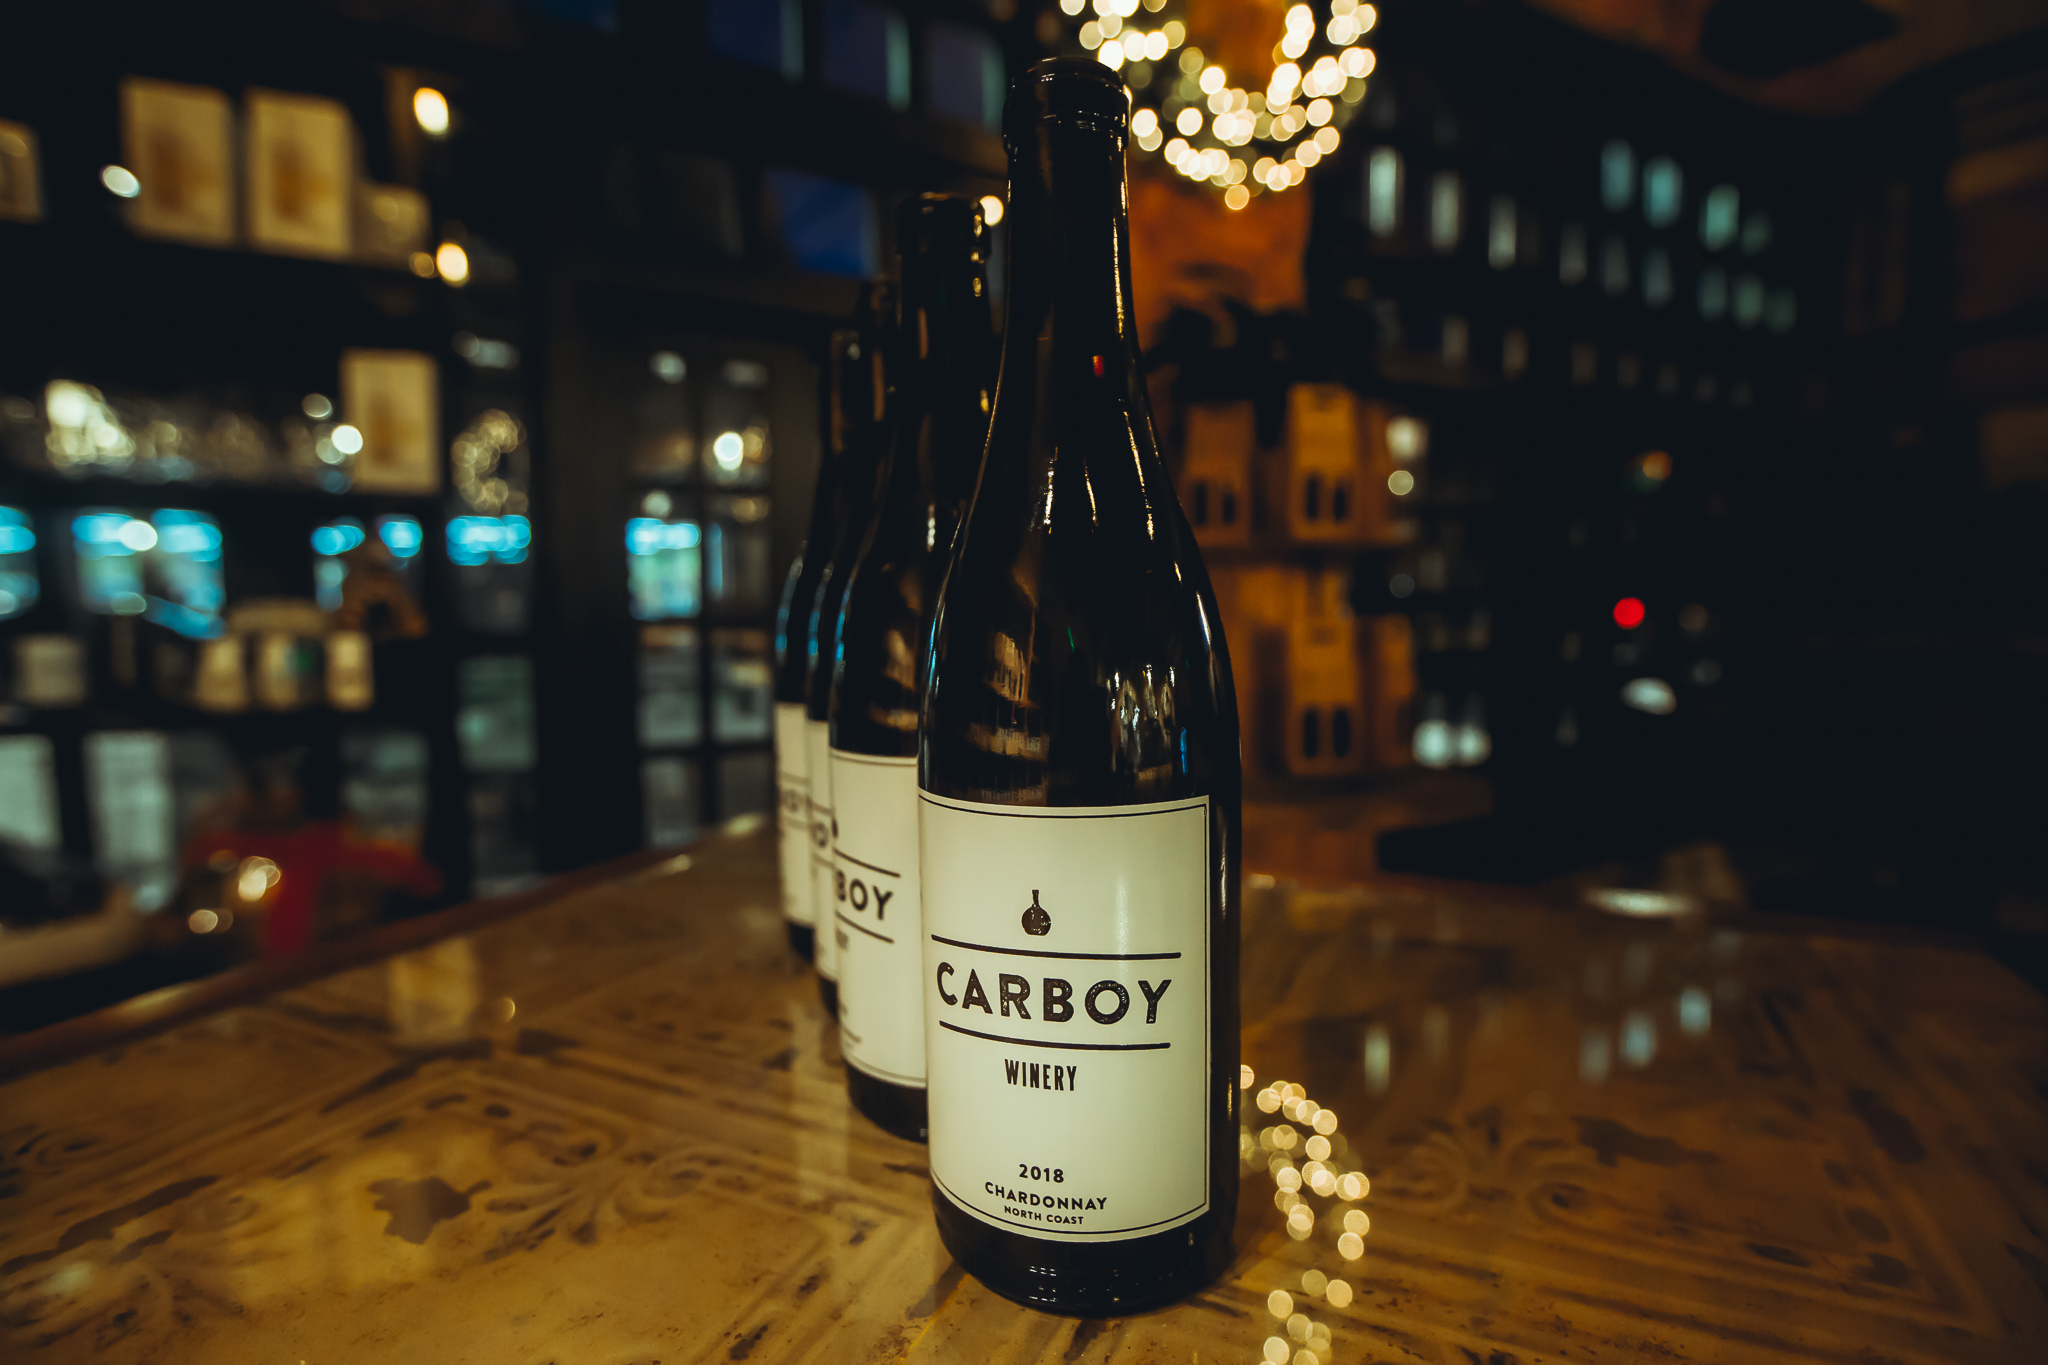 Carboy winery